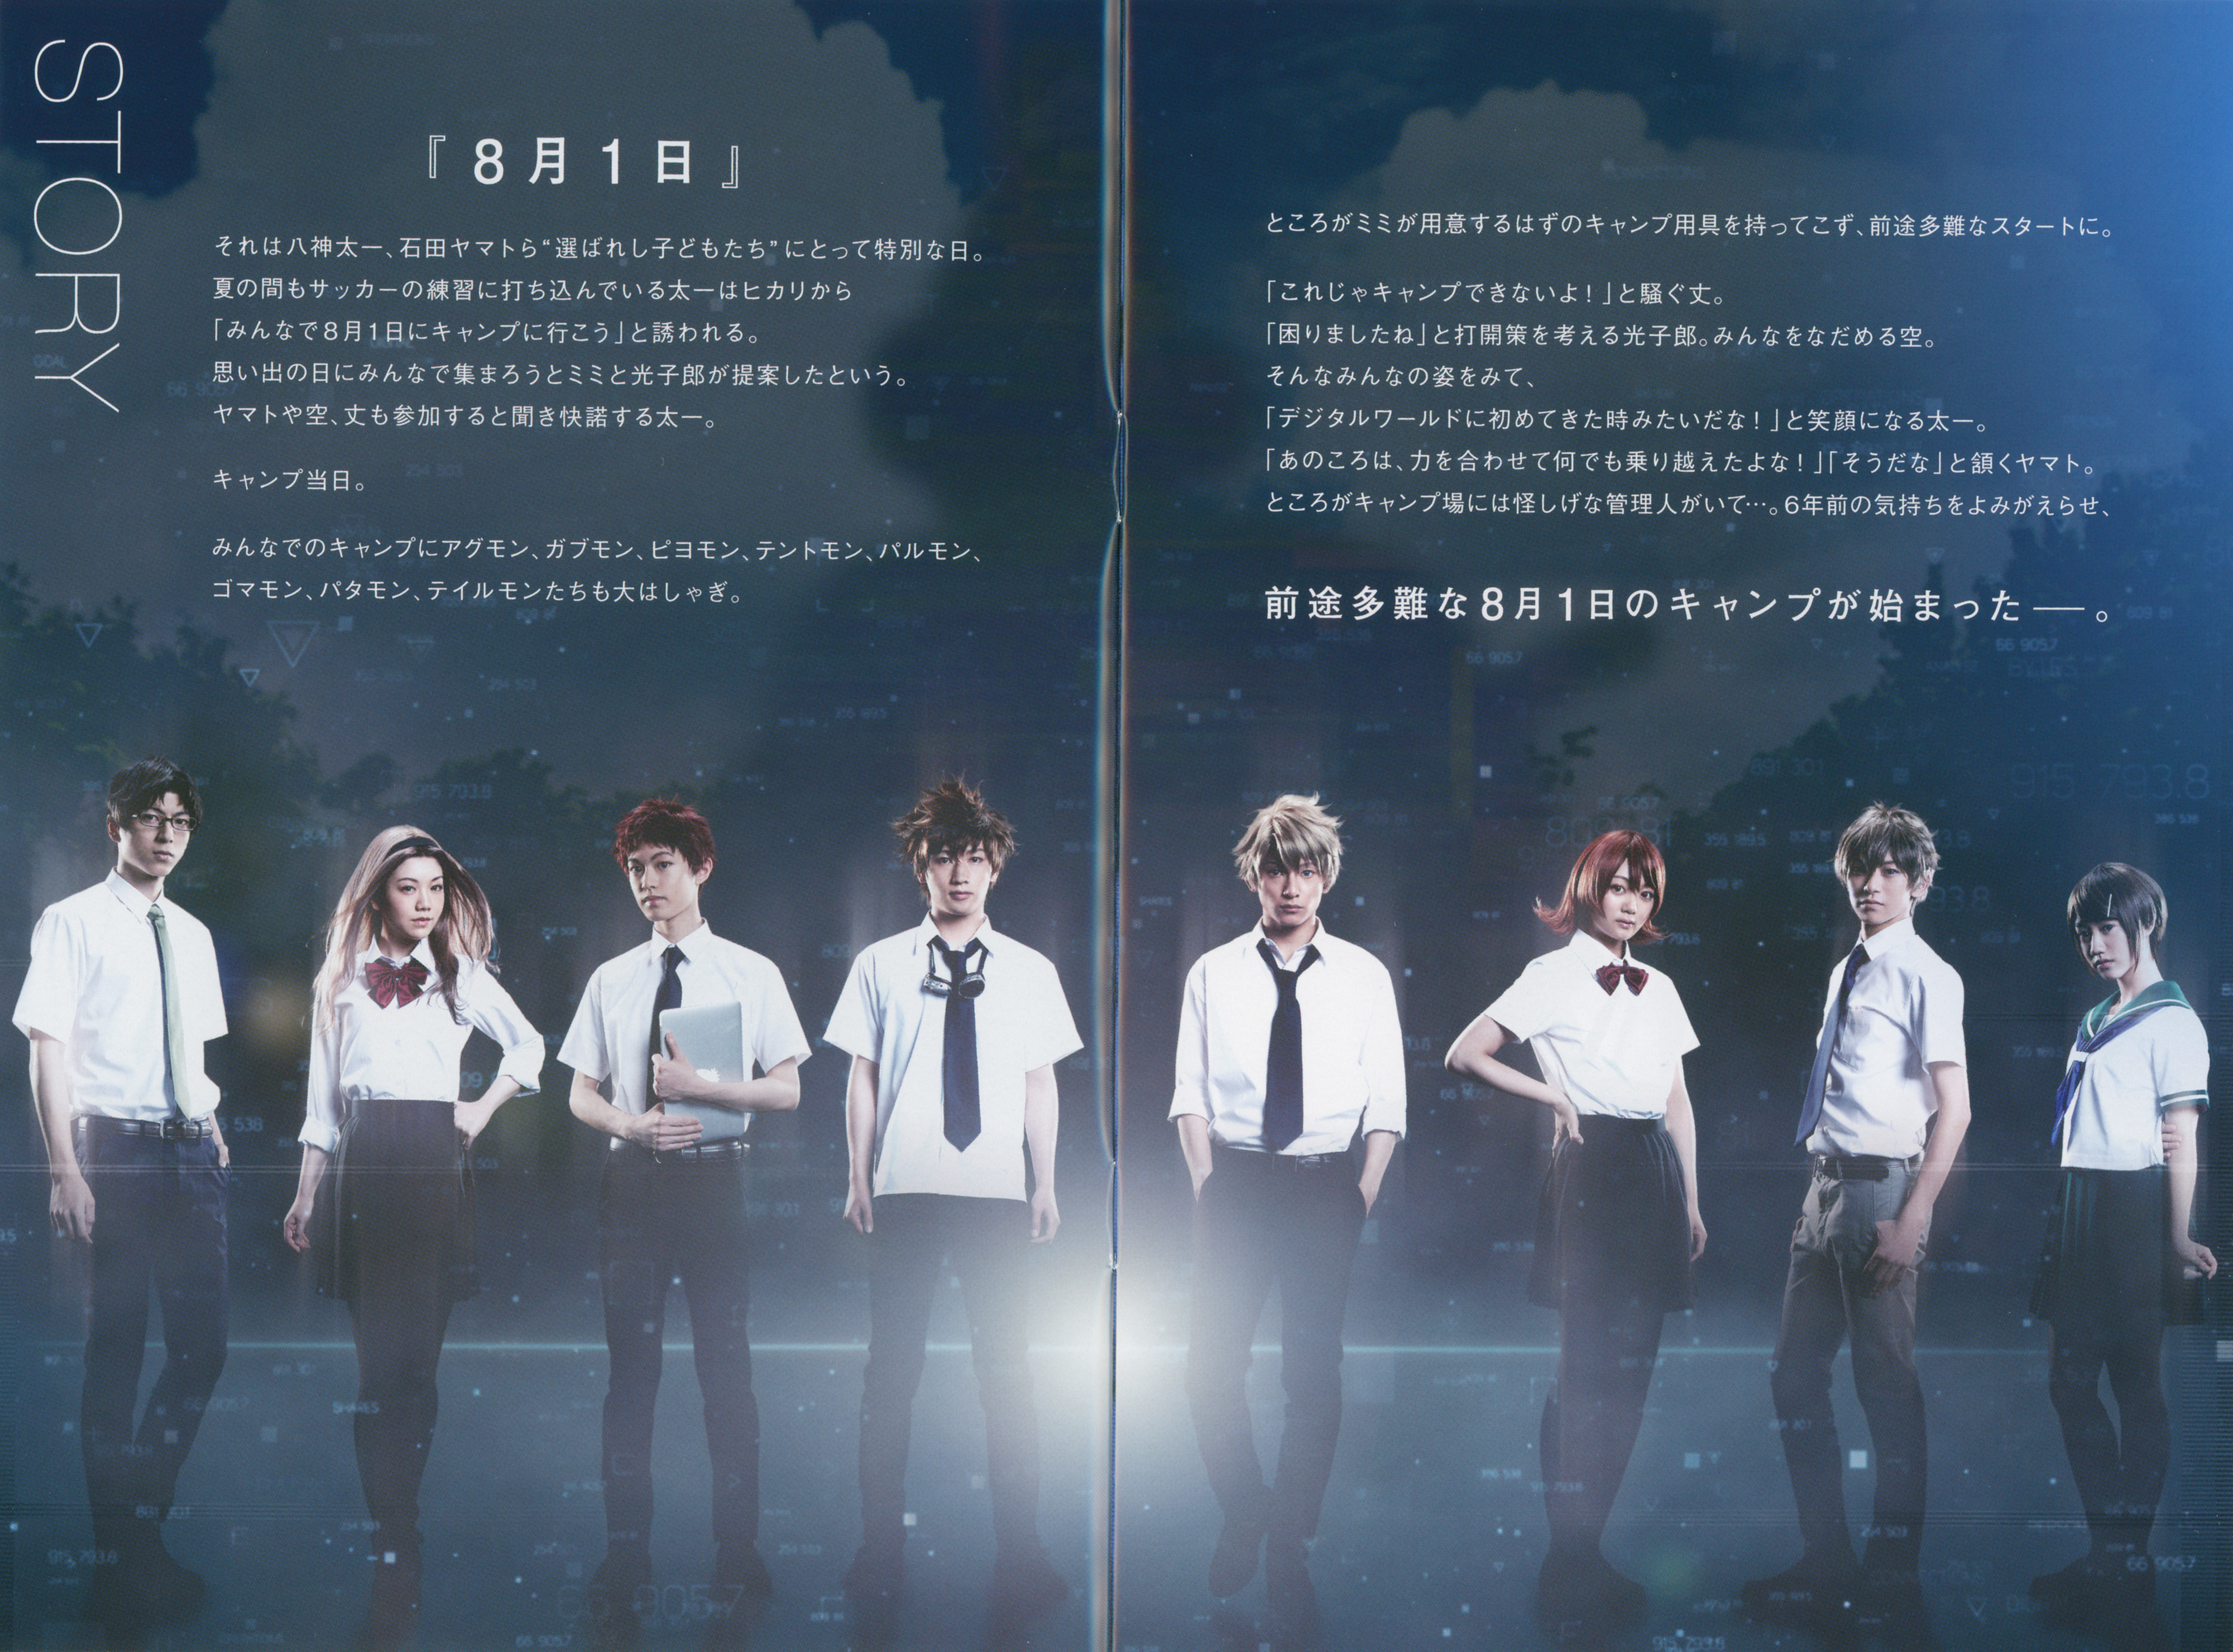 With the Will Digimon Forums, News, Podcast on X: There's going to be  livestreams of the Digimon Adventure tri. Stage Play! if you live in  Japan. More at WtW-   /